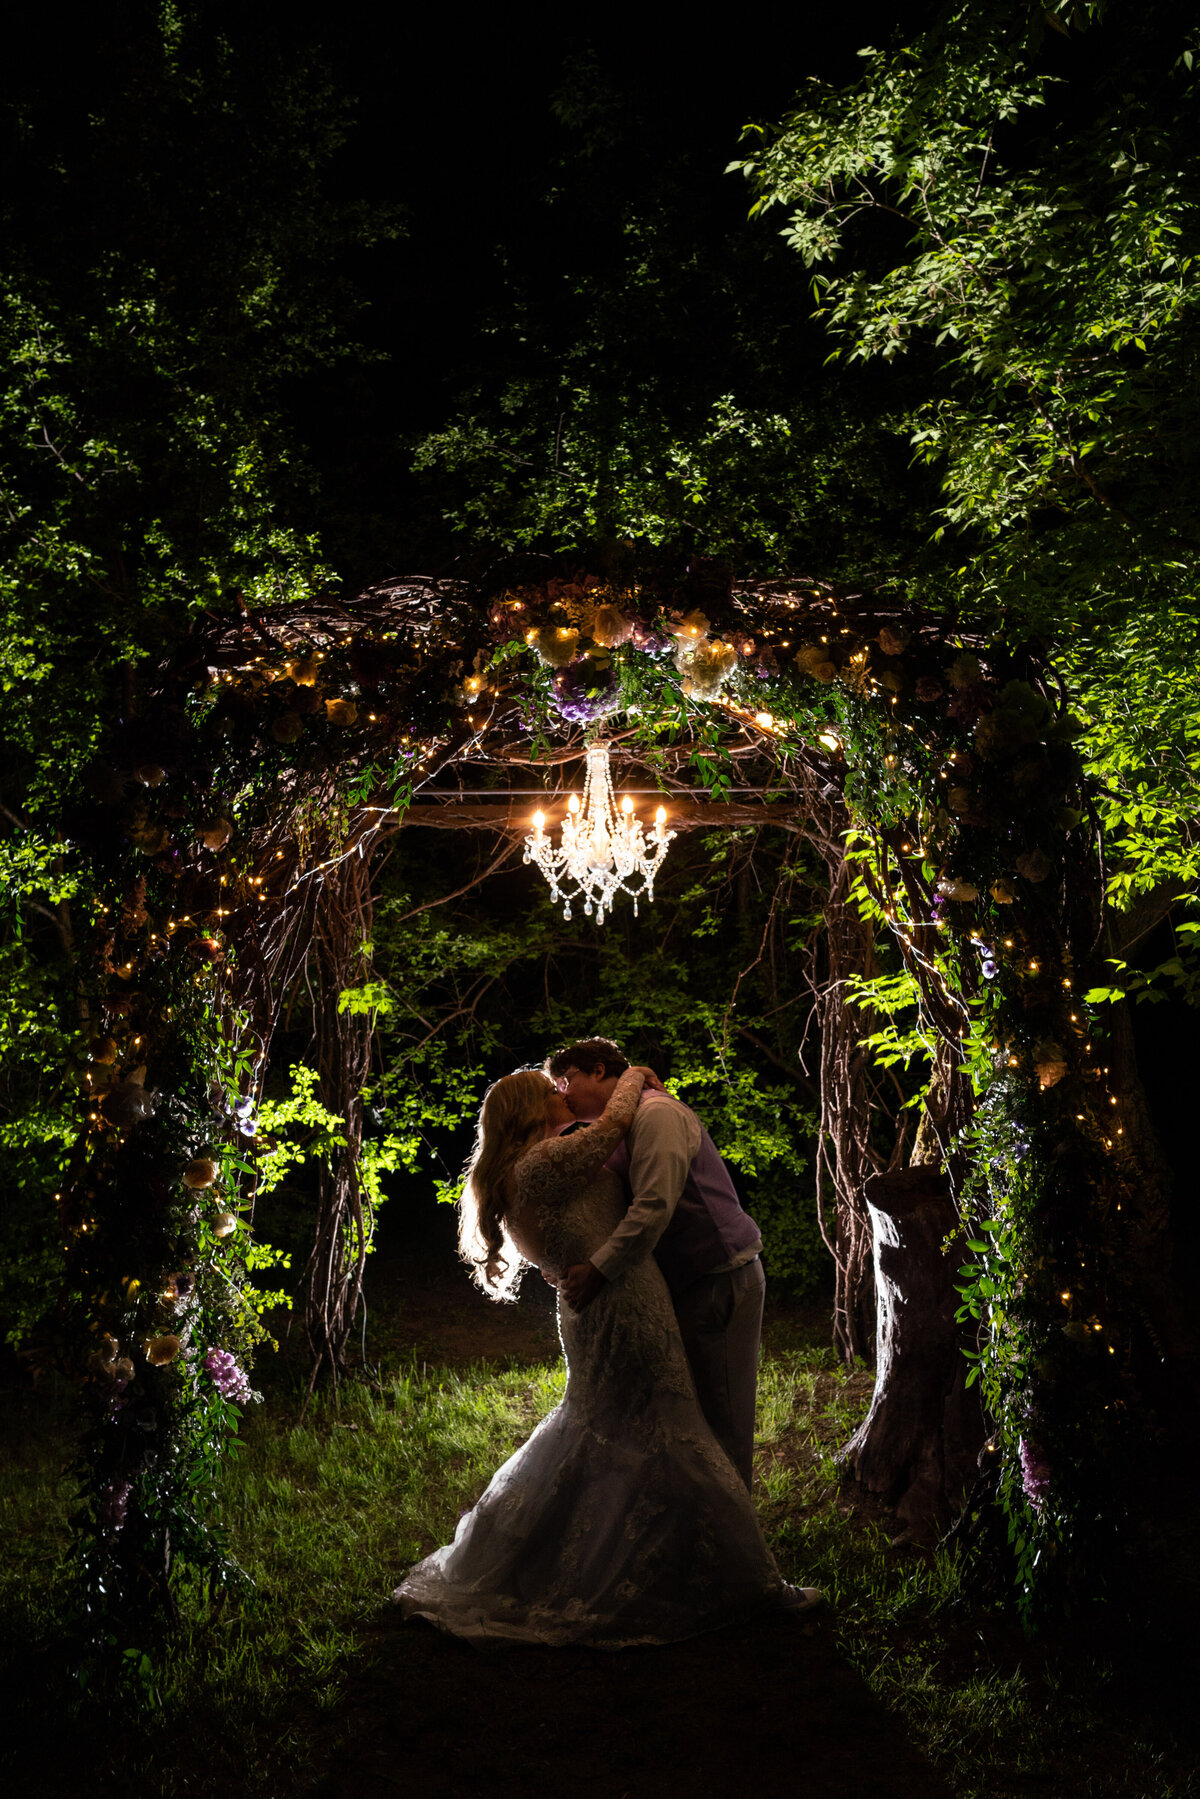 Bride and groom kiss under lights in a garden at night.